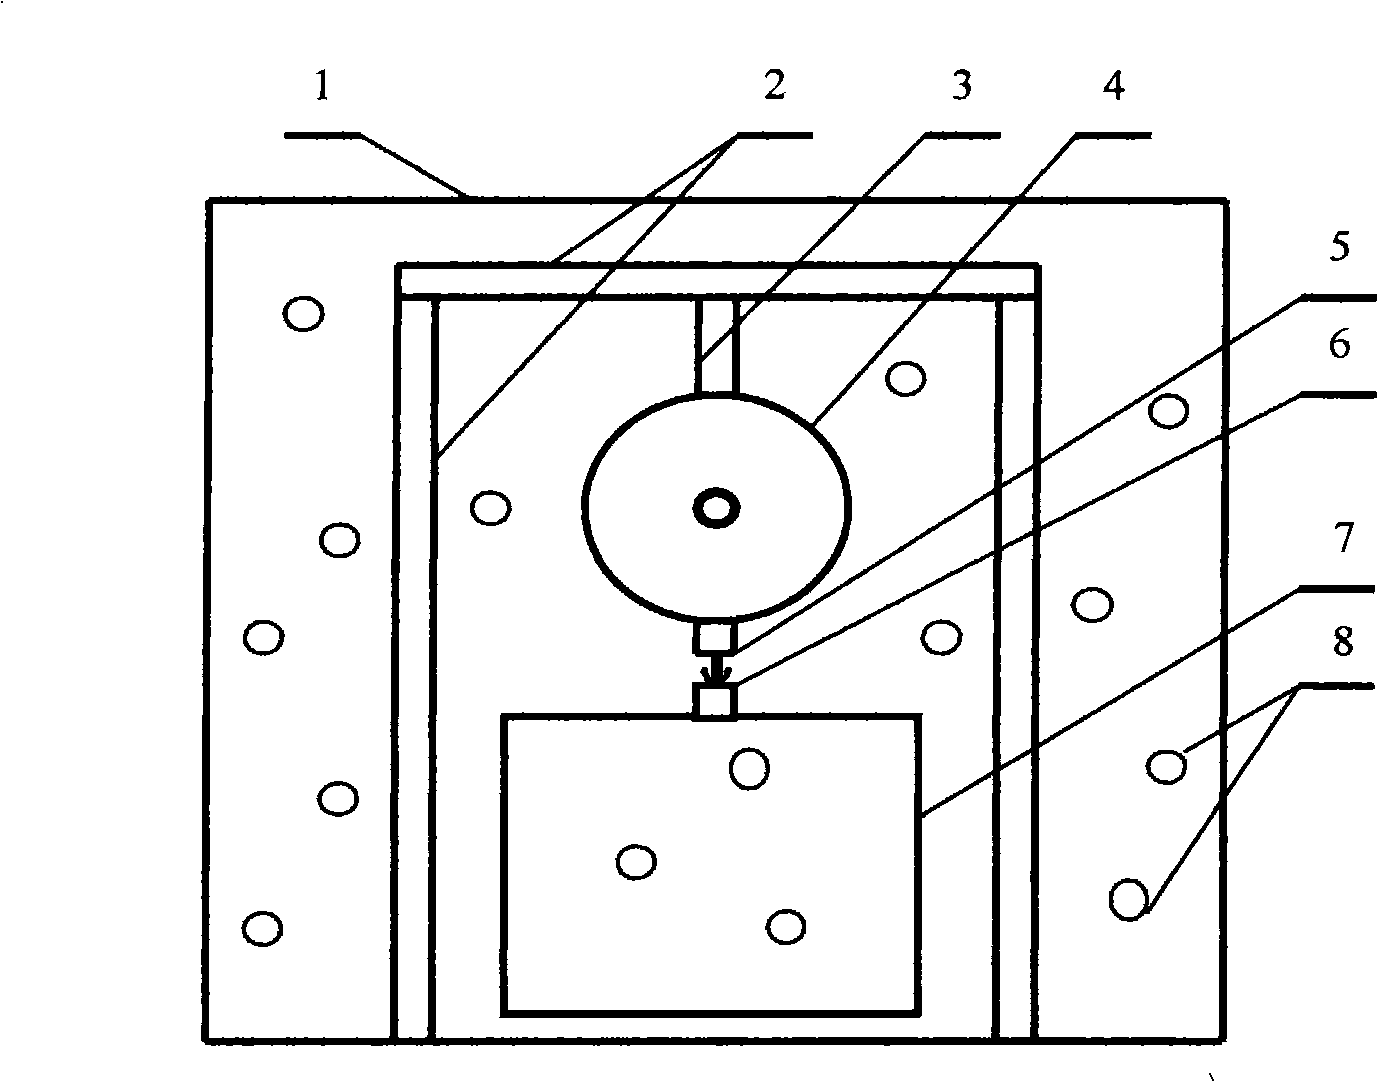 Demonstration apparatus for measuring weight self-change